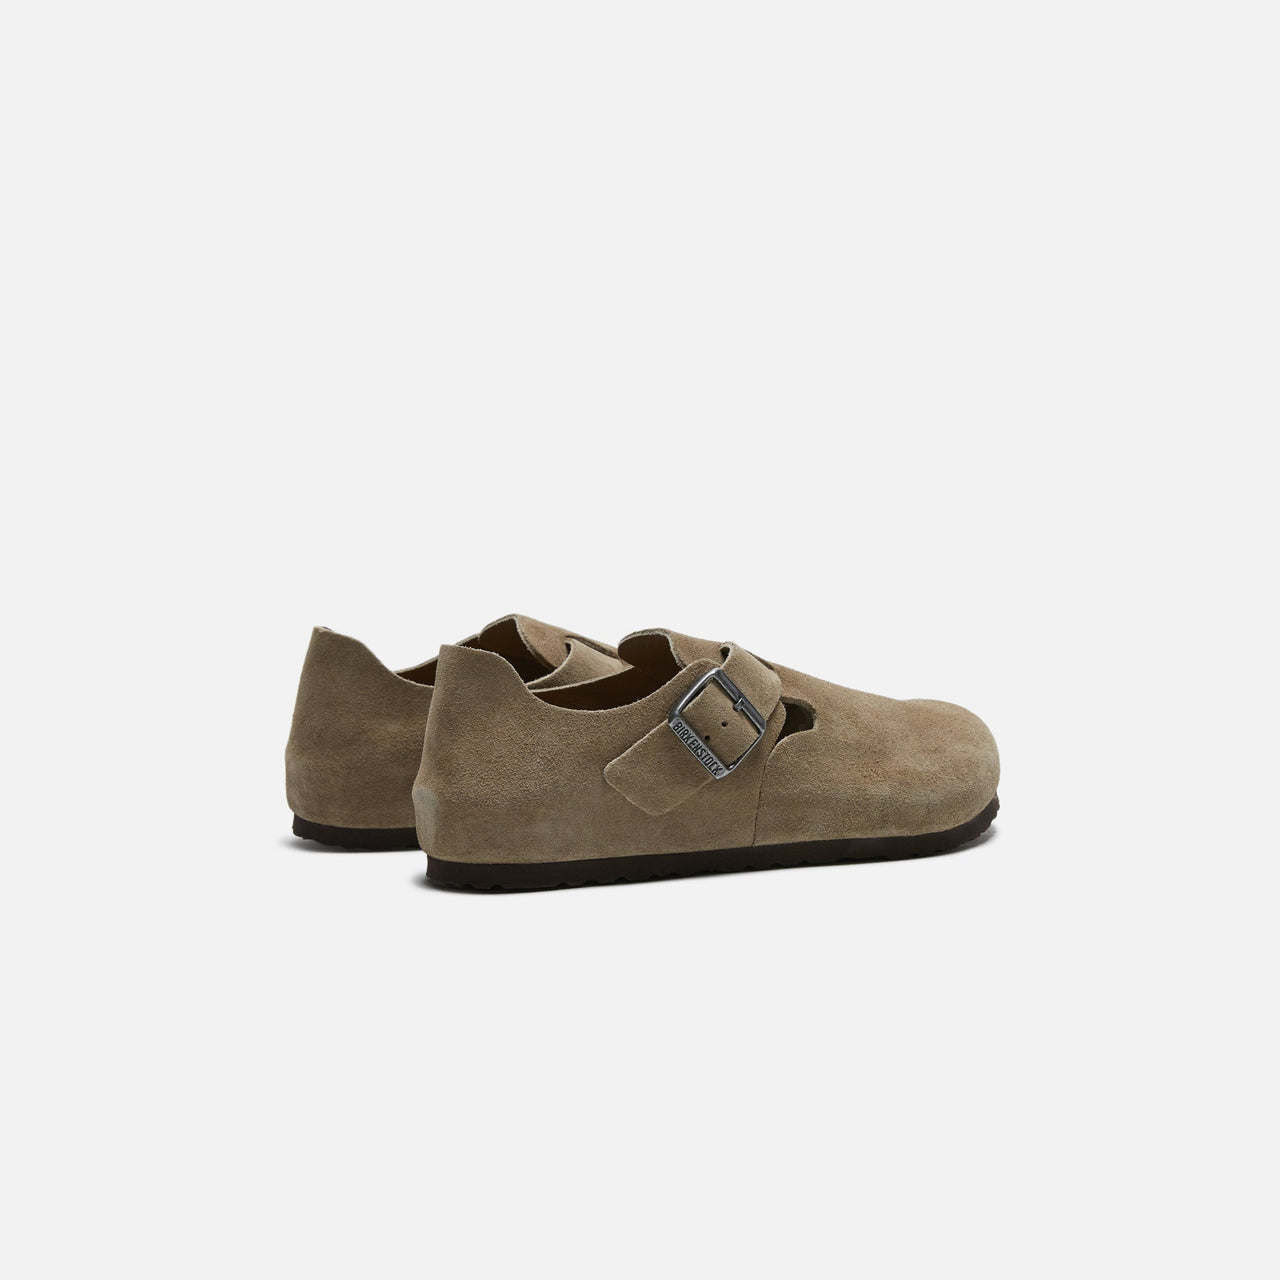 Versatile Birkenstock London Suede Taupe mules for casual and formal occasions